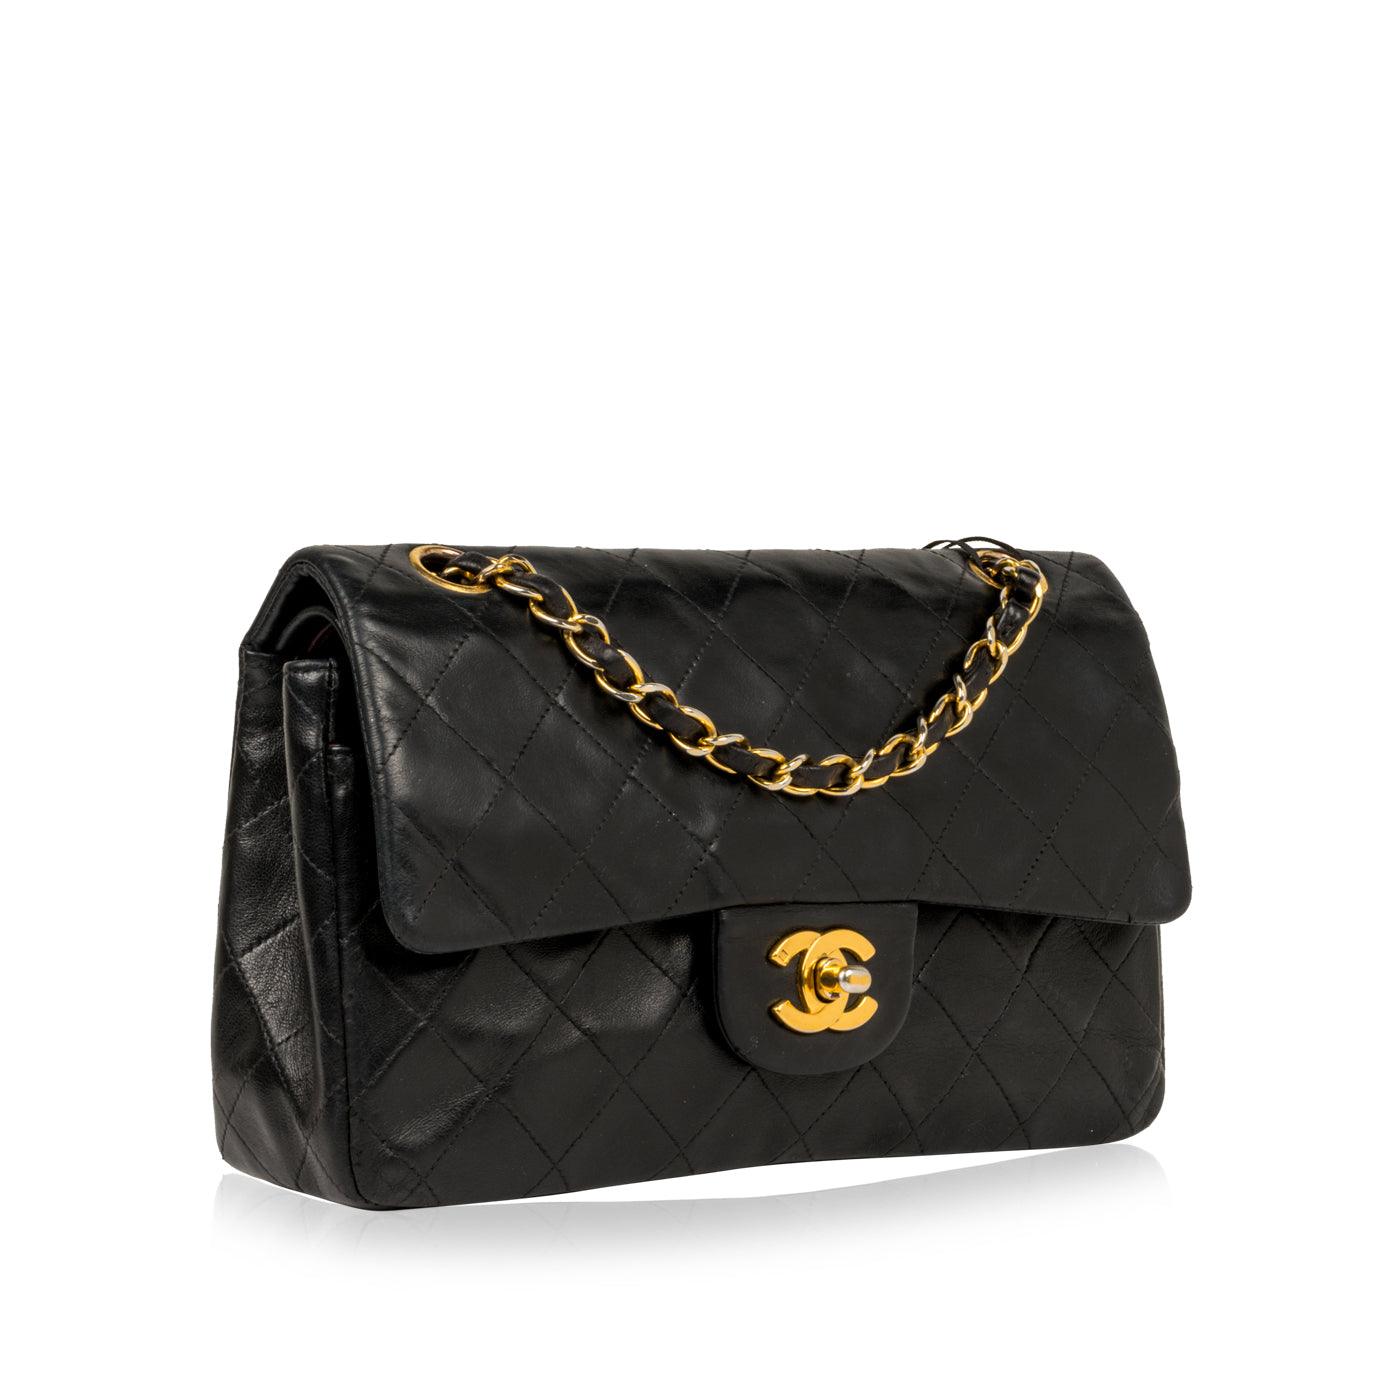 Chanel - Classic Flap Bag Small - Black Lambskin - GHW - Vintage